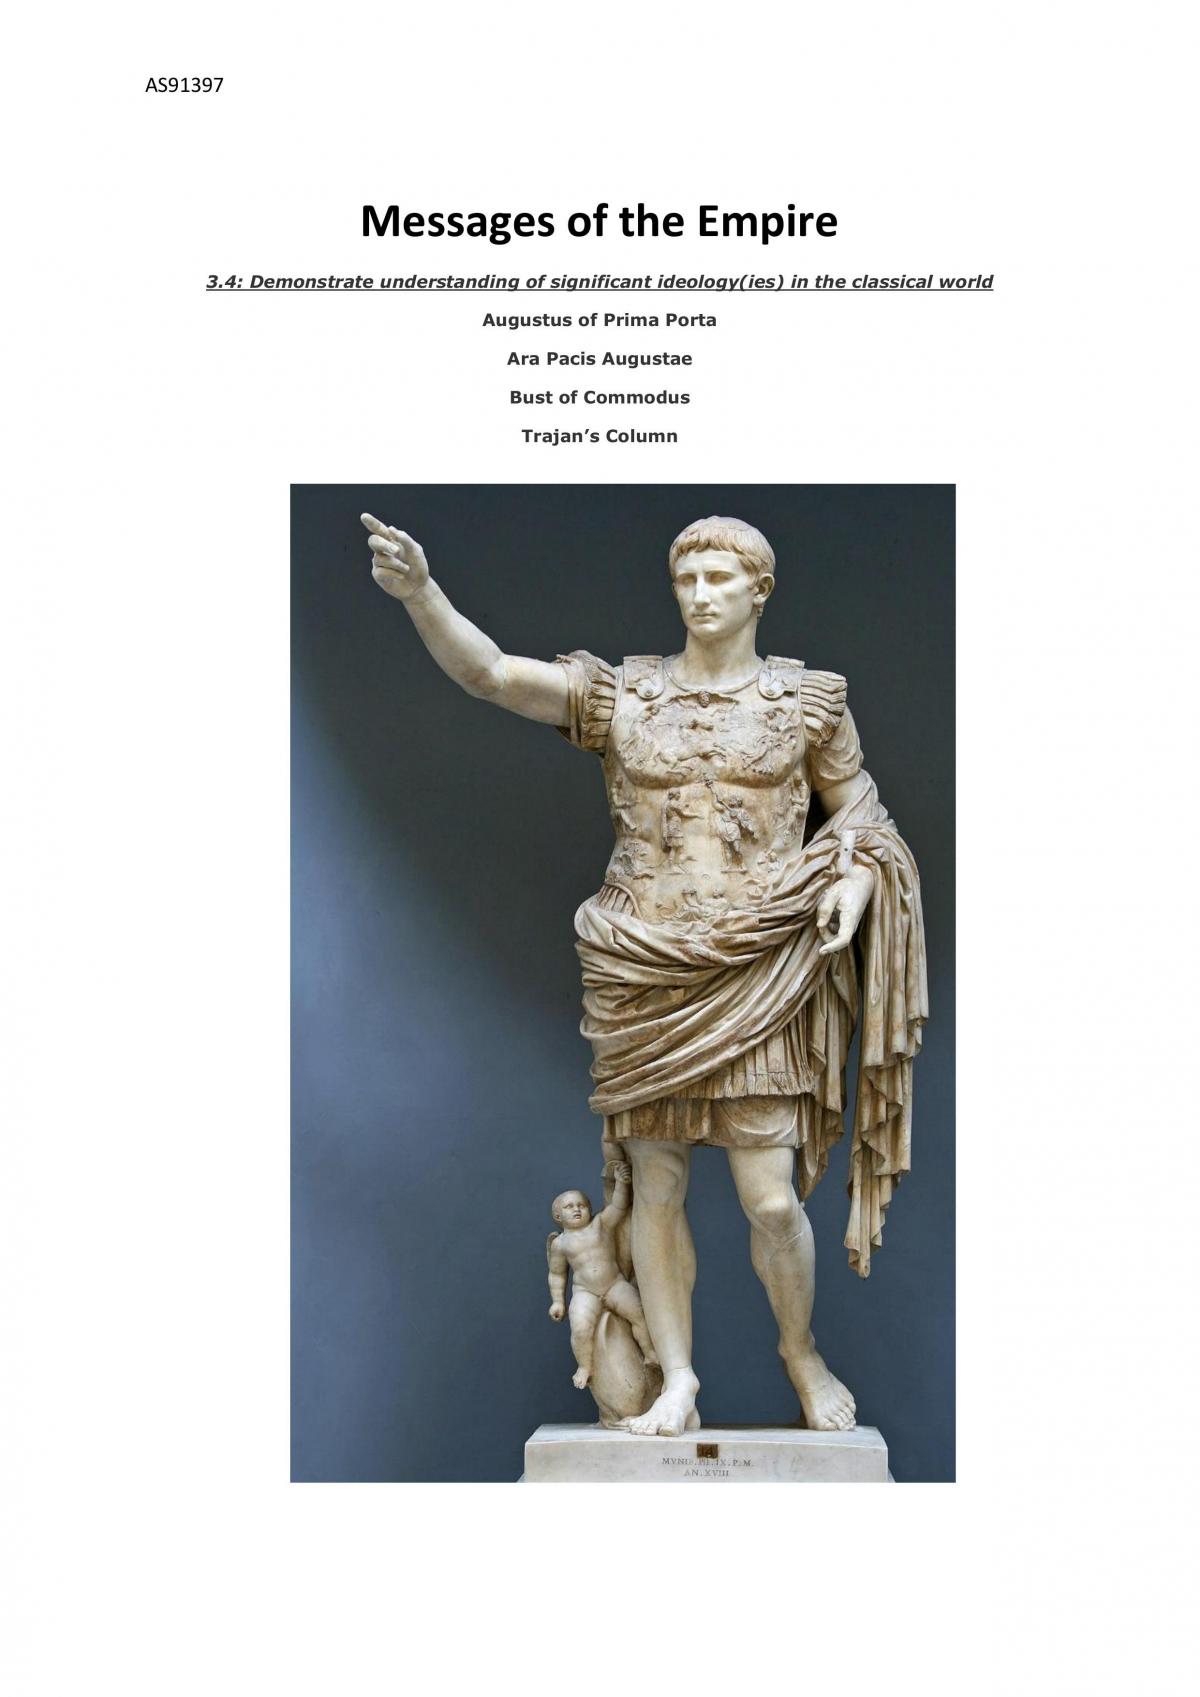 AS91397: Demonstrate understanding of significant idealogy(ies) in the classical world.  - Page 1